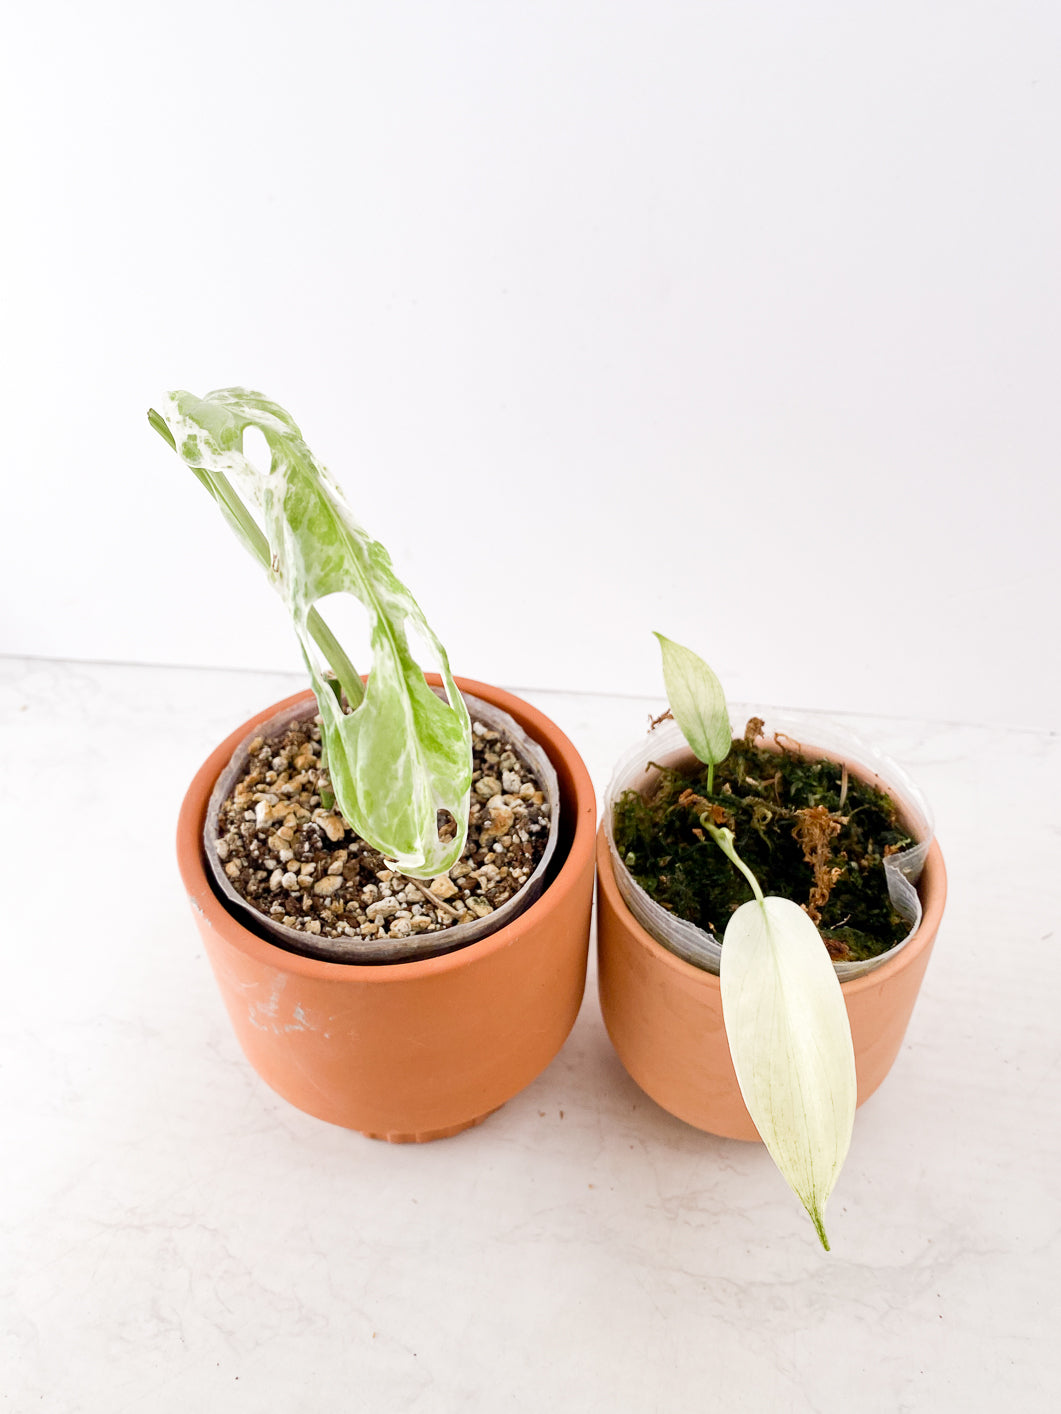 Combo deal! Philodendron Florida Ghost mint 2 leaves + 1 leaf Monstera Adansonii Super mint slightly rooted